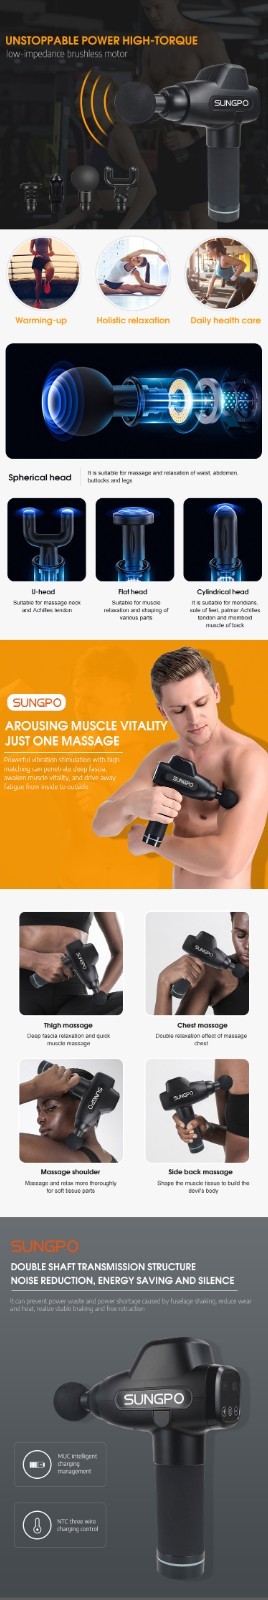 SUNGPO professional muscle massager machine supplier for sports injuries